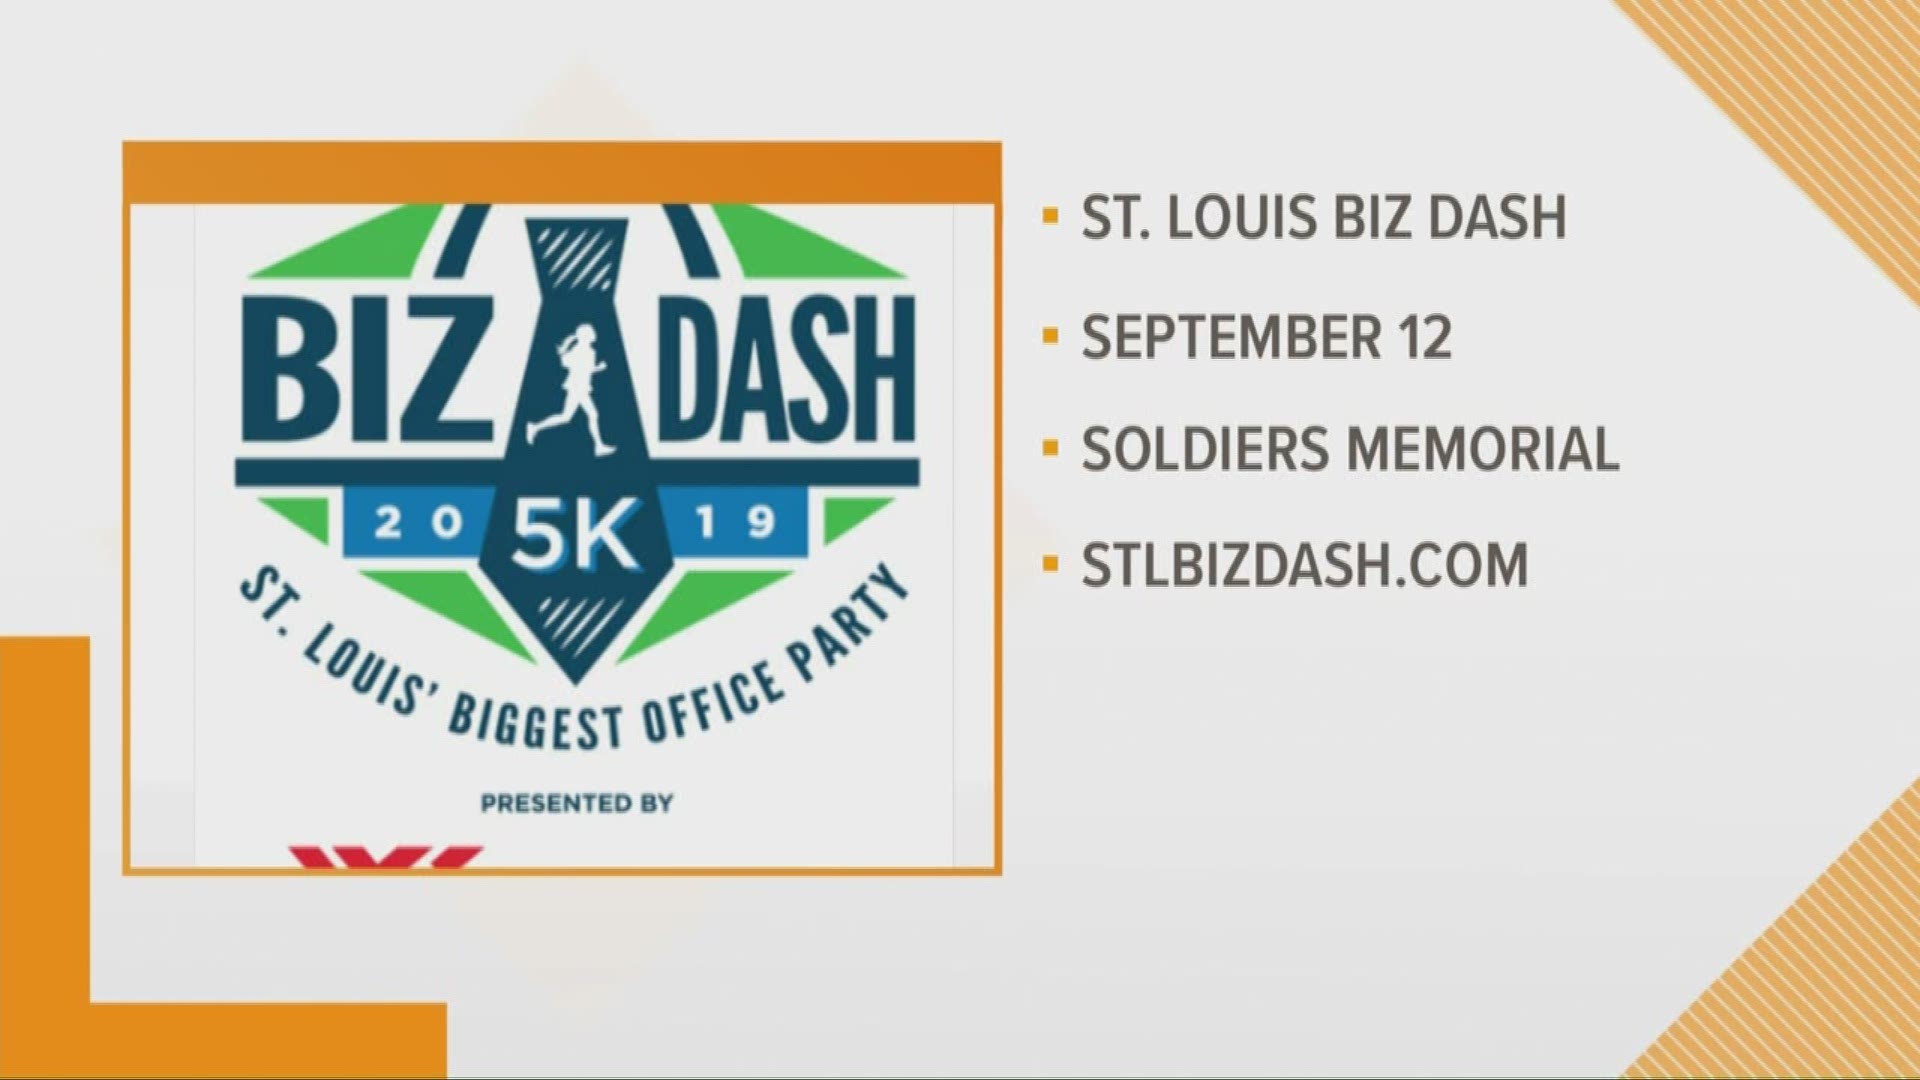 It's the ultimate team building and bonding experience for local companies. More than 200 of them and thousands of people are expected at this year's St. Louis Biz Dash at Soldiers Memorial. Tom Dolan of St. Louis Sports Commission is here talks about it.